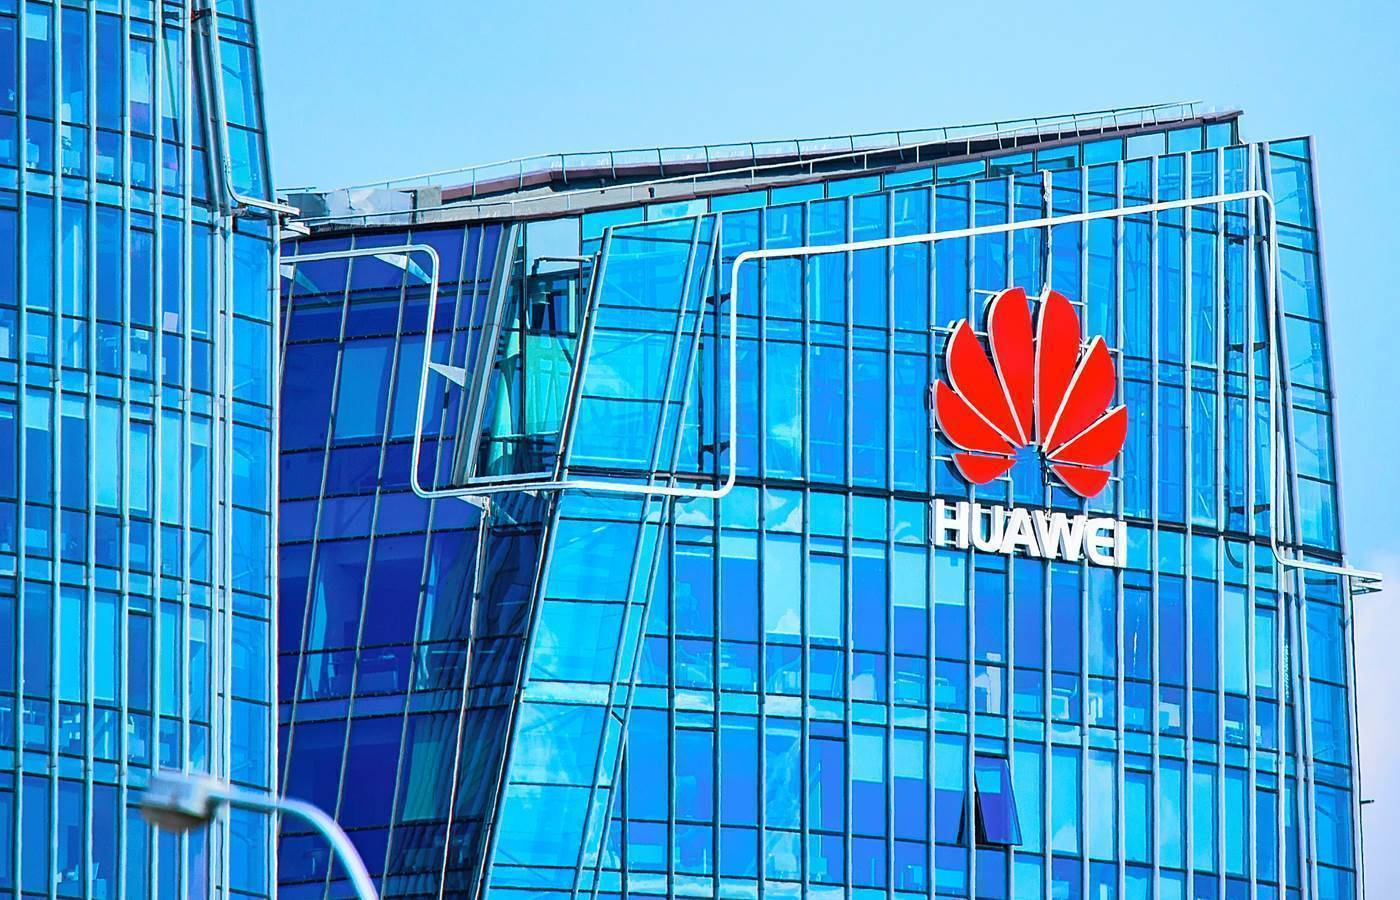 US moves to bar Huawei, other Chinese telecoms from certifying wireless equipment